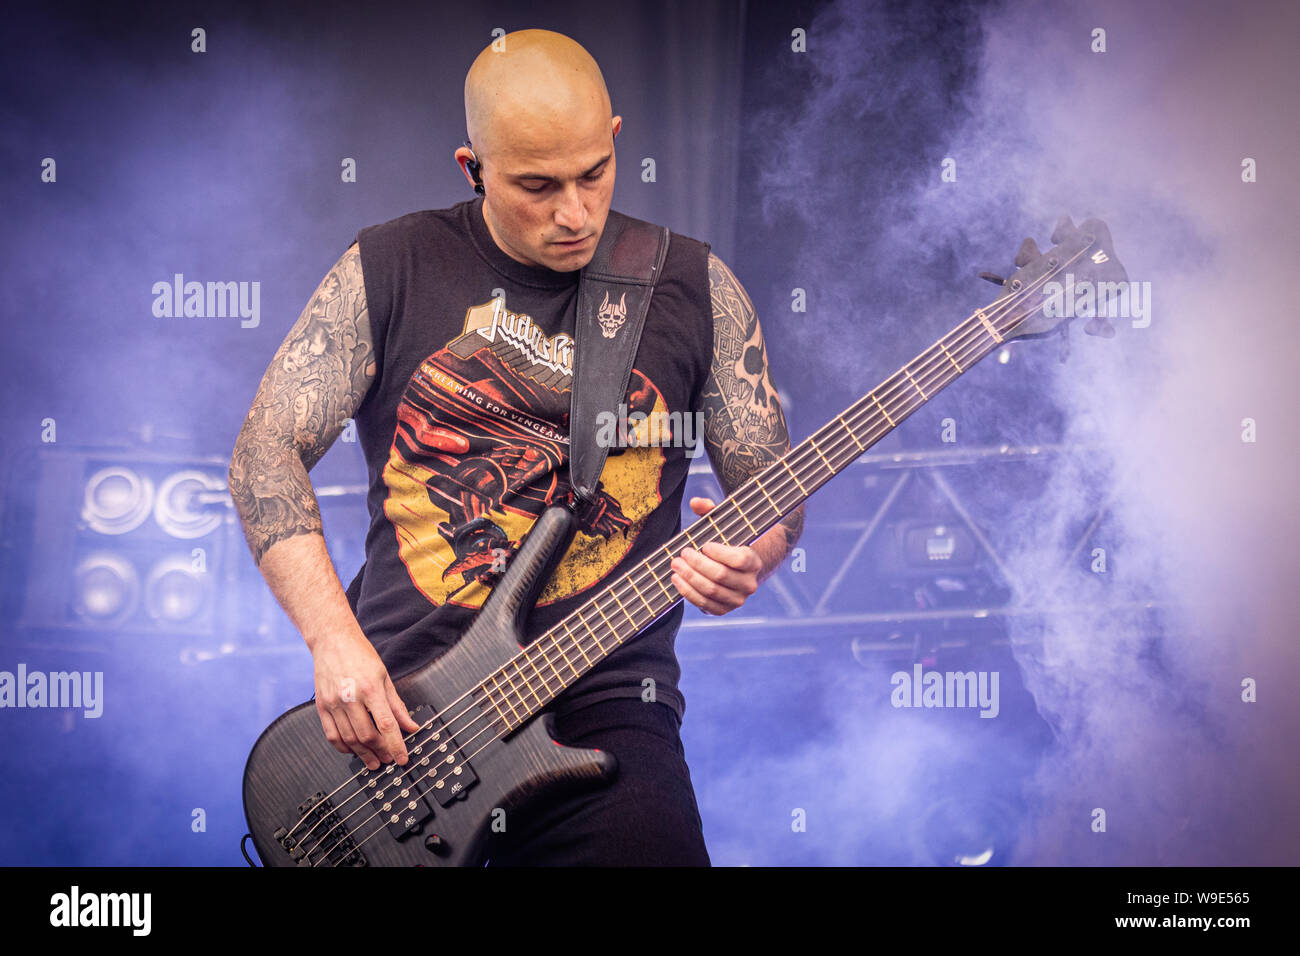 Trivium on stage at the 2019 Copenhell festival in Copenhagen, Denmark. Here bassist Paolo Gregoletto Stock Photo